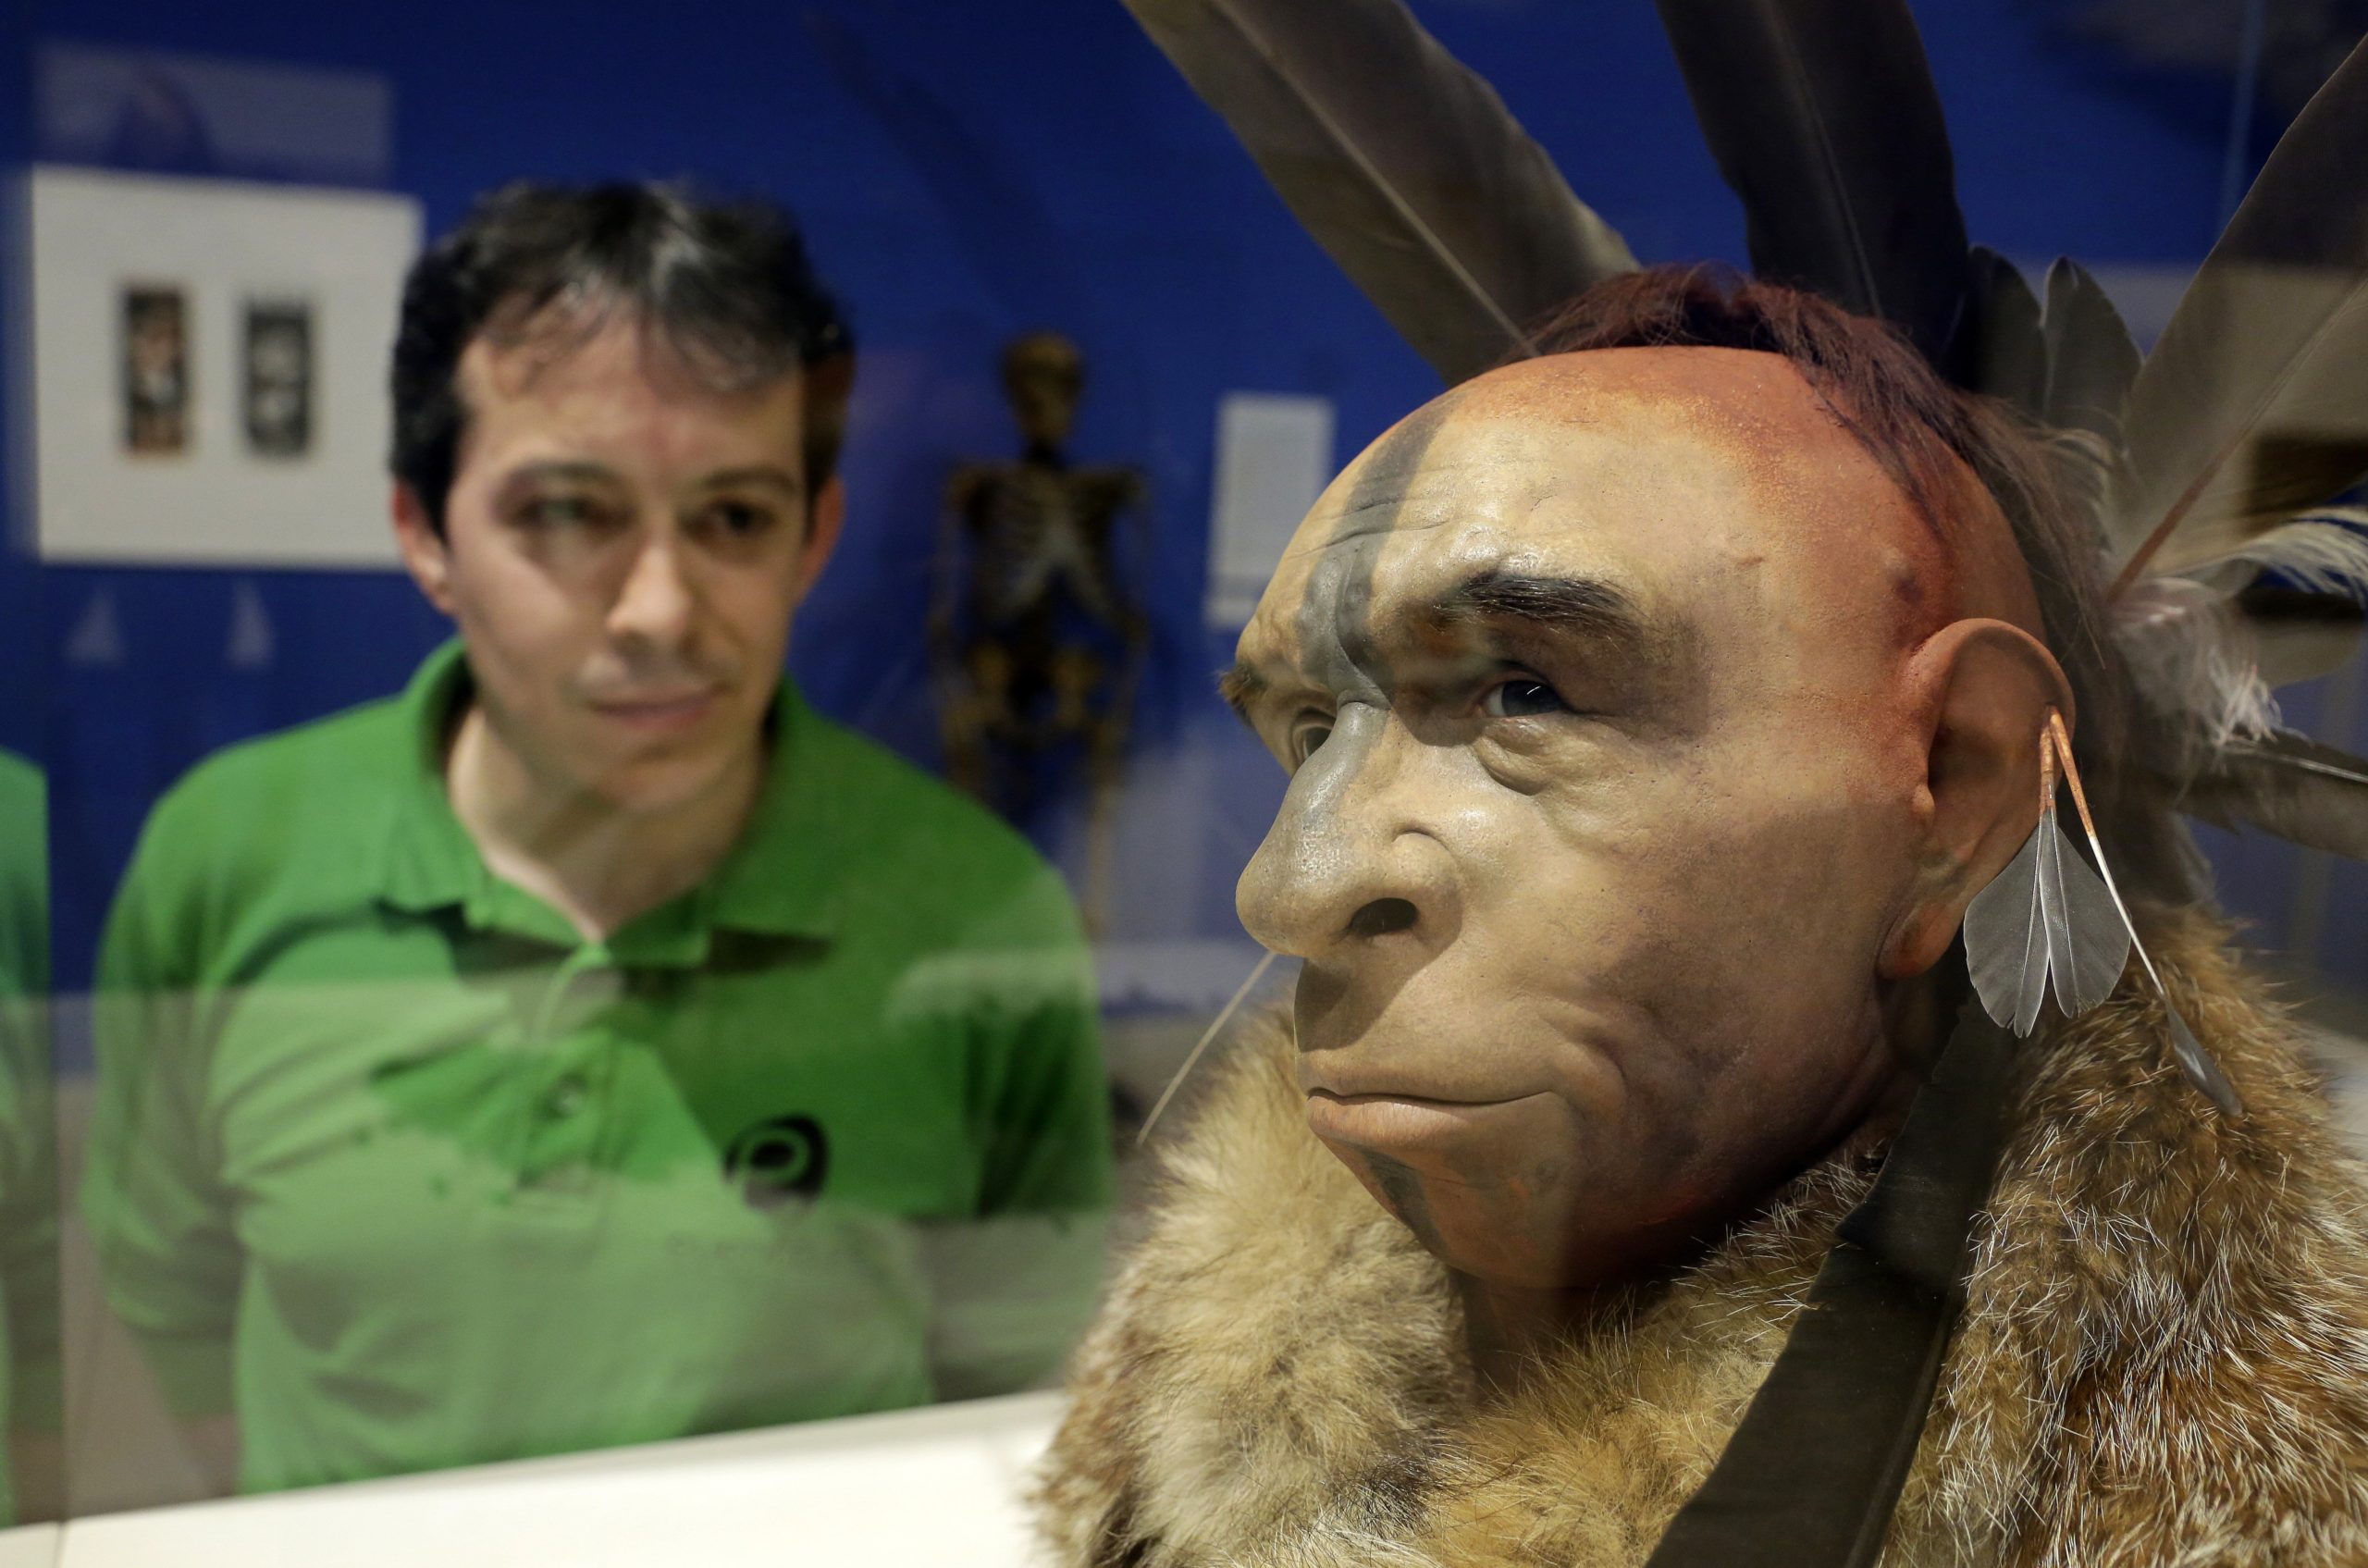 A man looking at a Neanderthal model at a Spanish exhibit in 2014. (Photo: CESAR MANSO/AFP, Getty Images)